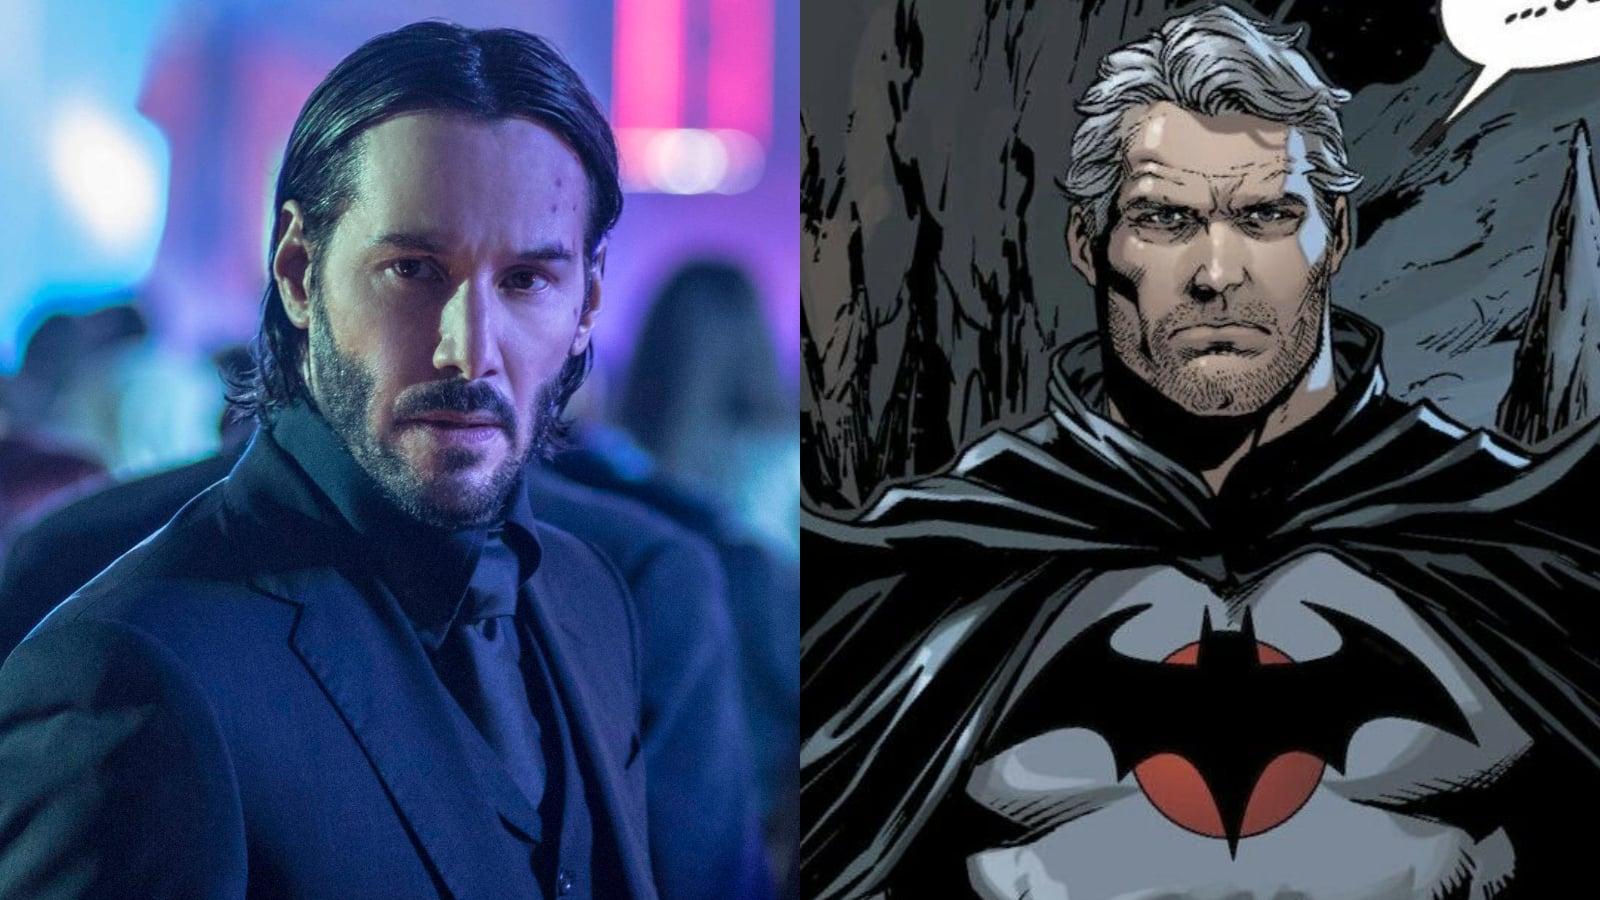 Keanu Reeves as John Wick and an image from a Batman DC comic